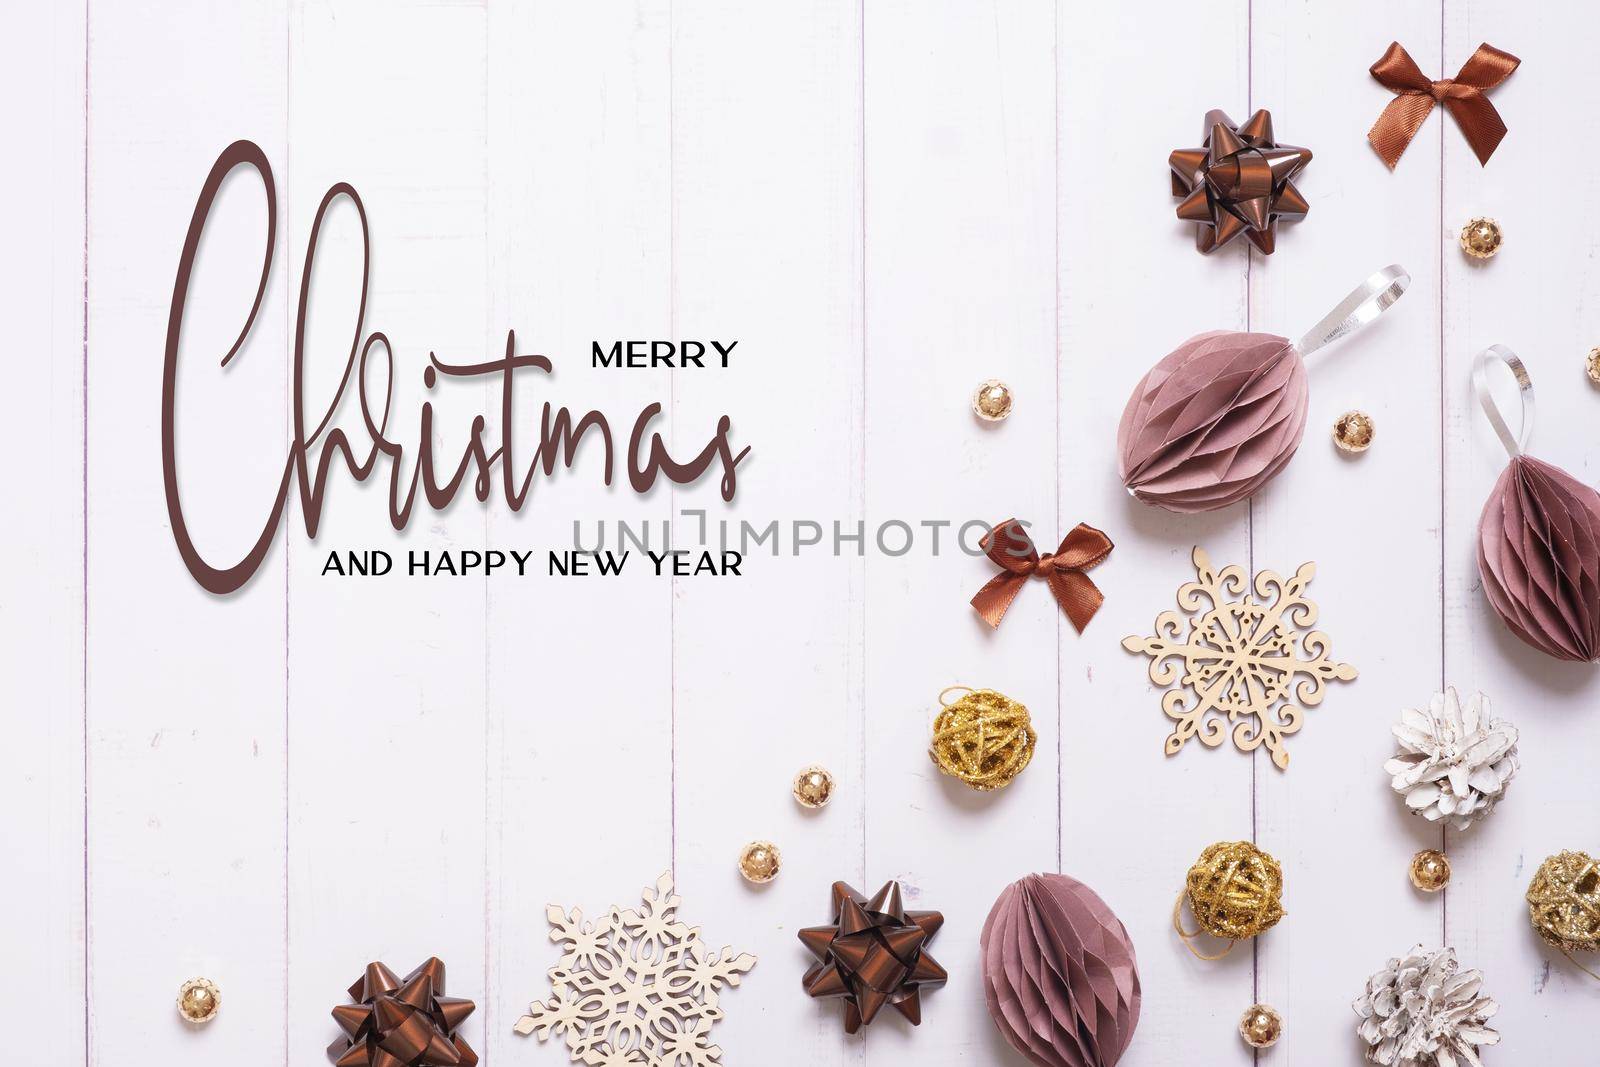 Merrry Christmas and Happy new year greeting card with composition flat lay on wooden background.